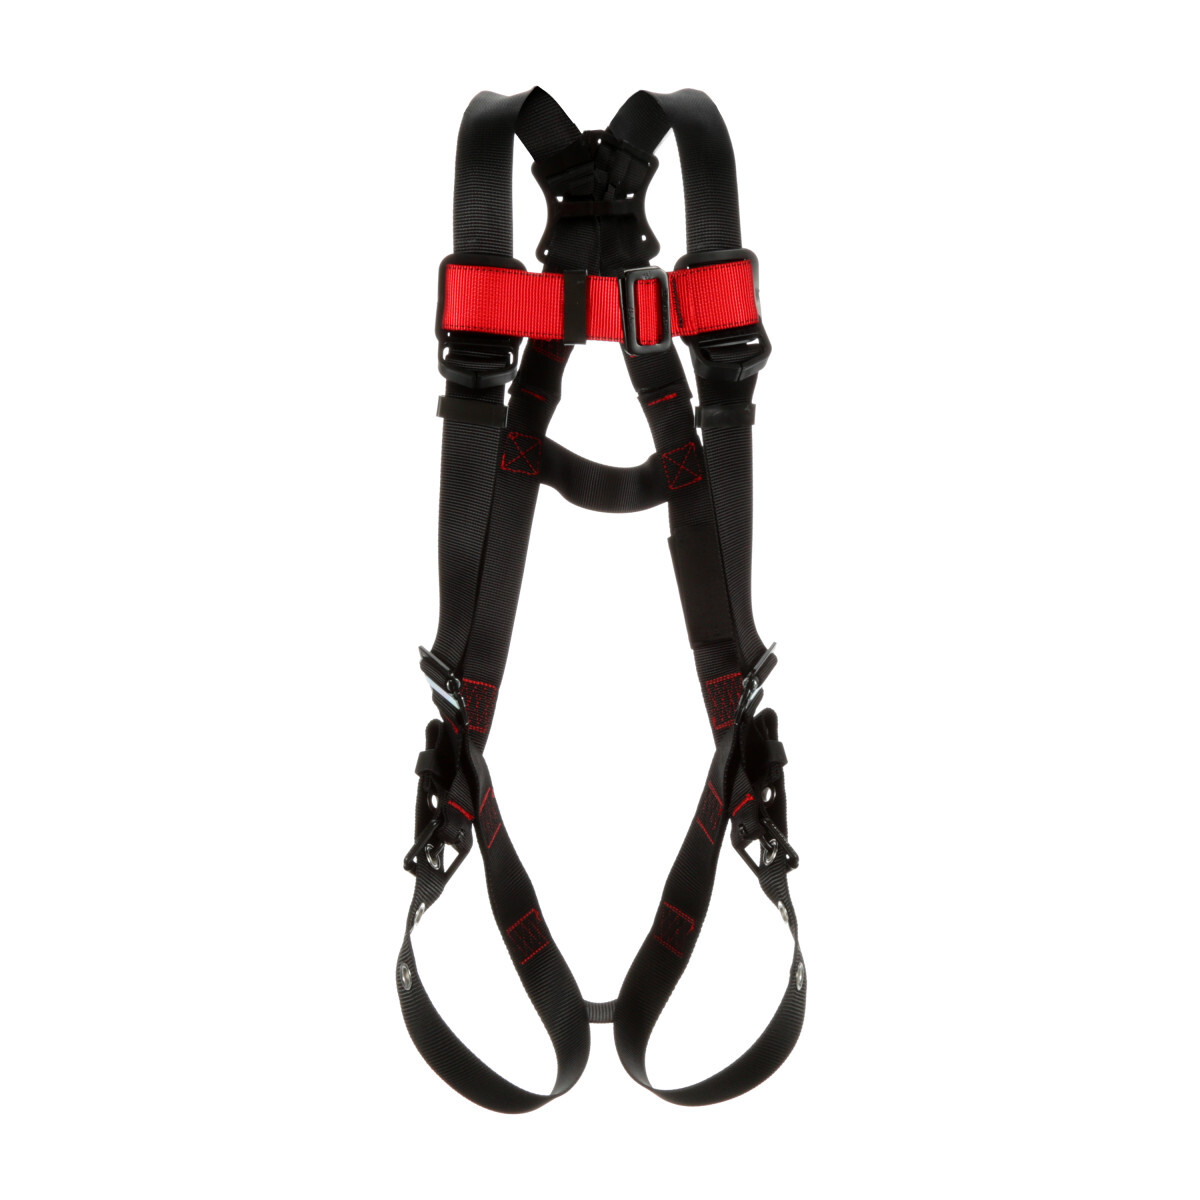 3M™ Protecta® Small Vest-Style Full Body Harness With Auto-Resetting Lanyard Keeper And Impact Indicator